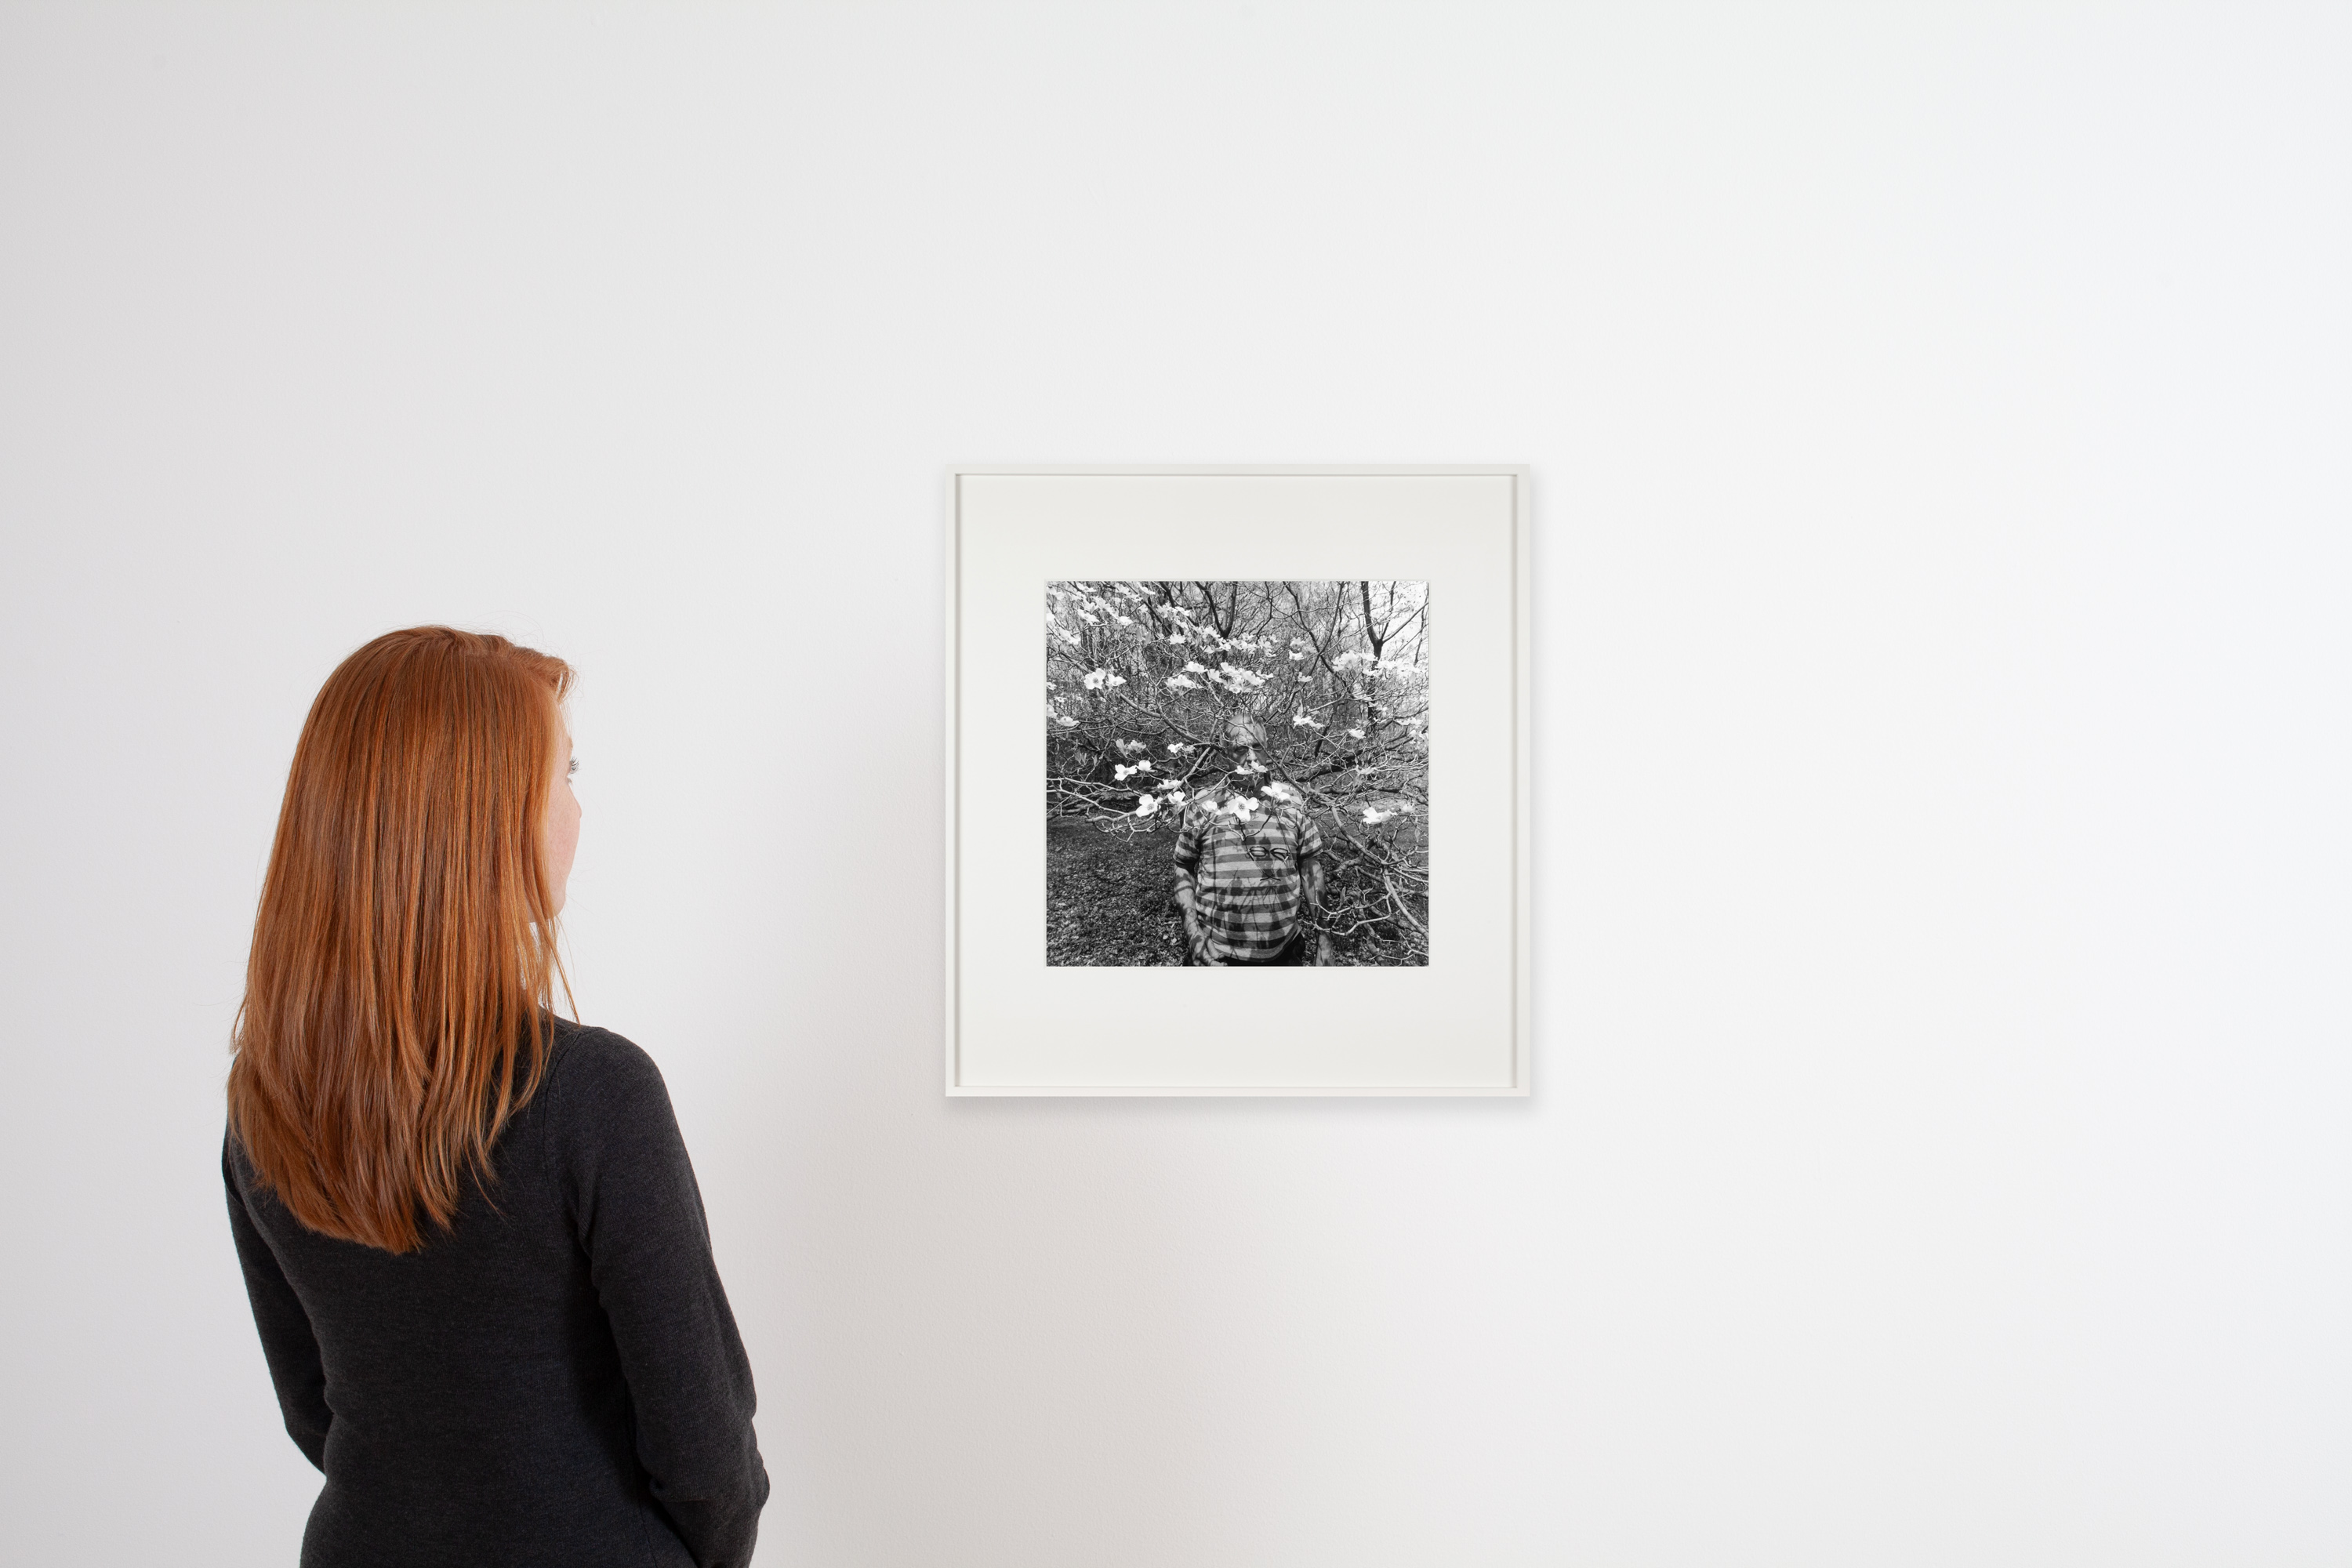 Black and white photograph of a figure standing within a blossomed tree framed in white on a white gallery wall